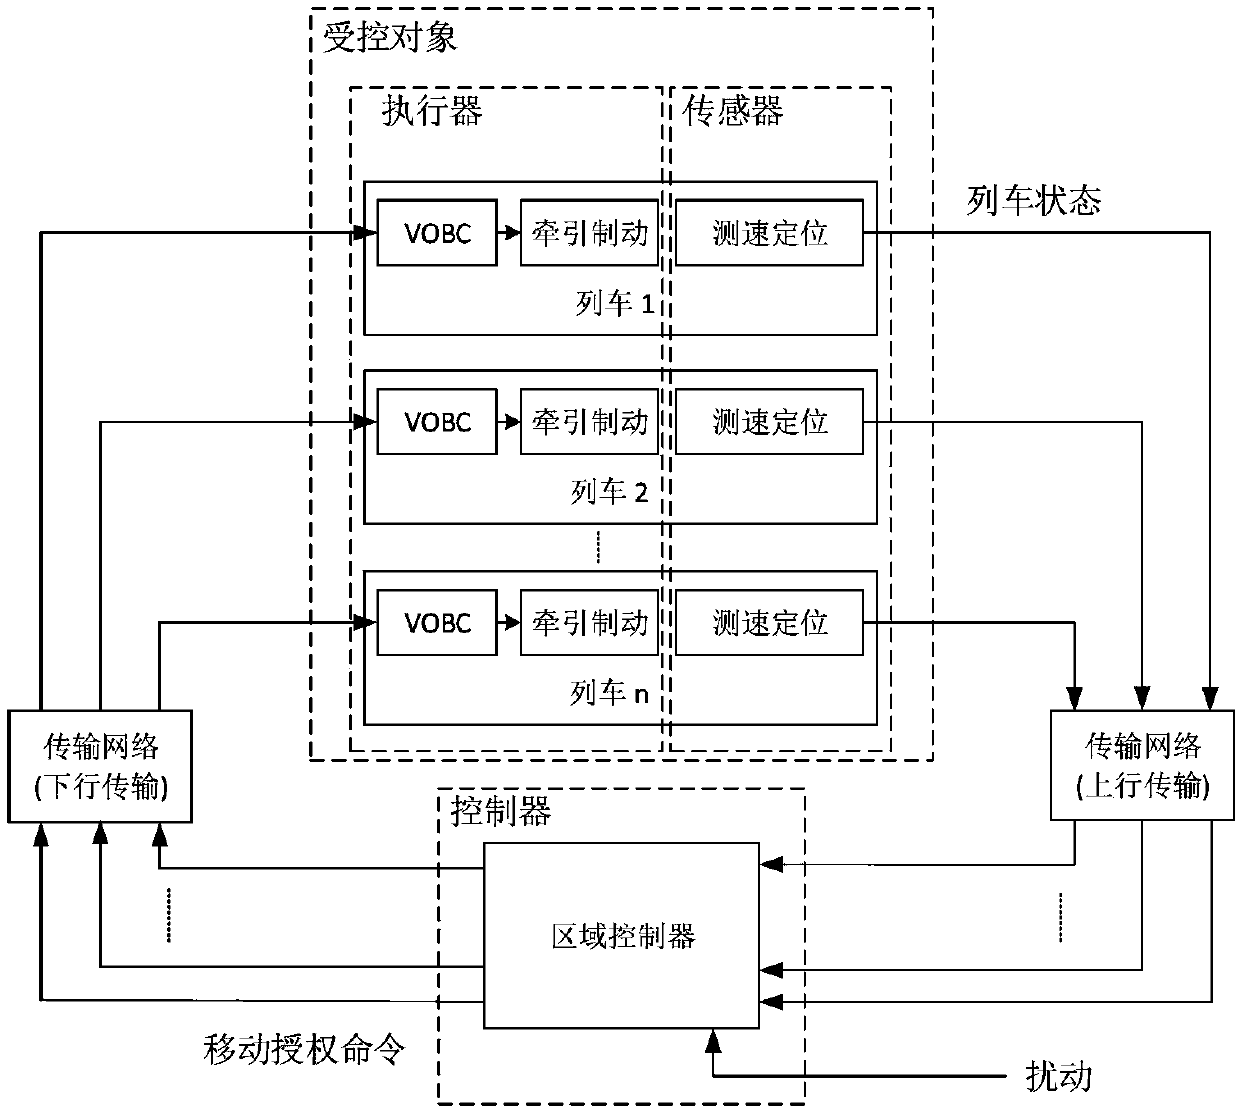 A Synchronization Method for Performance of Train Operation Control System